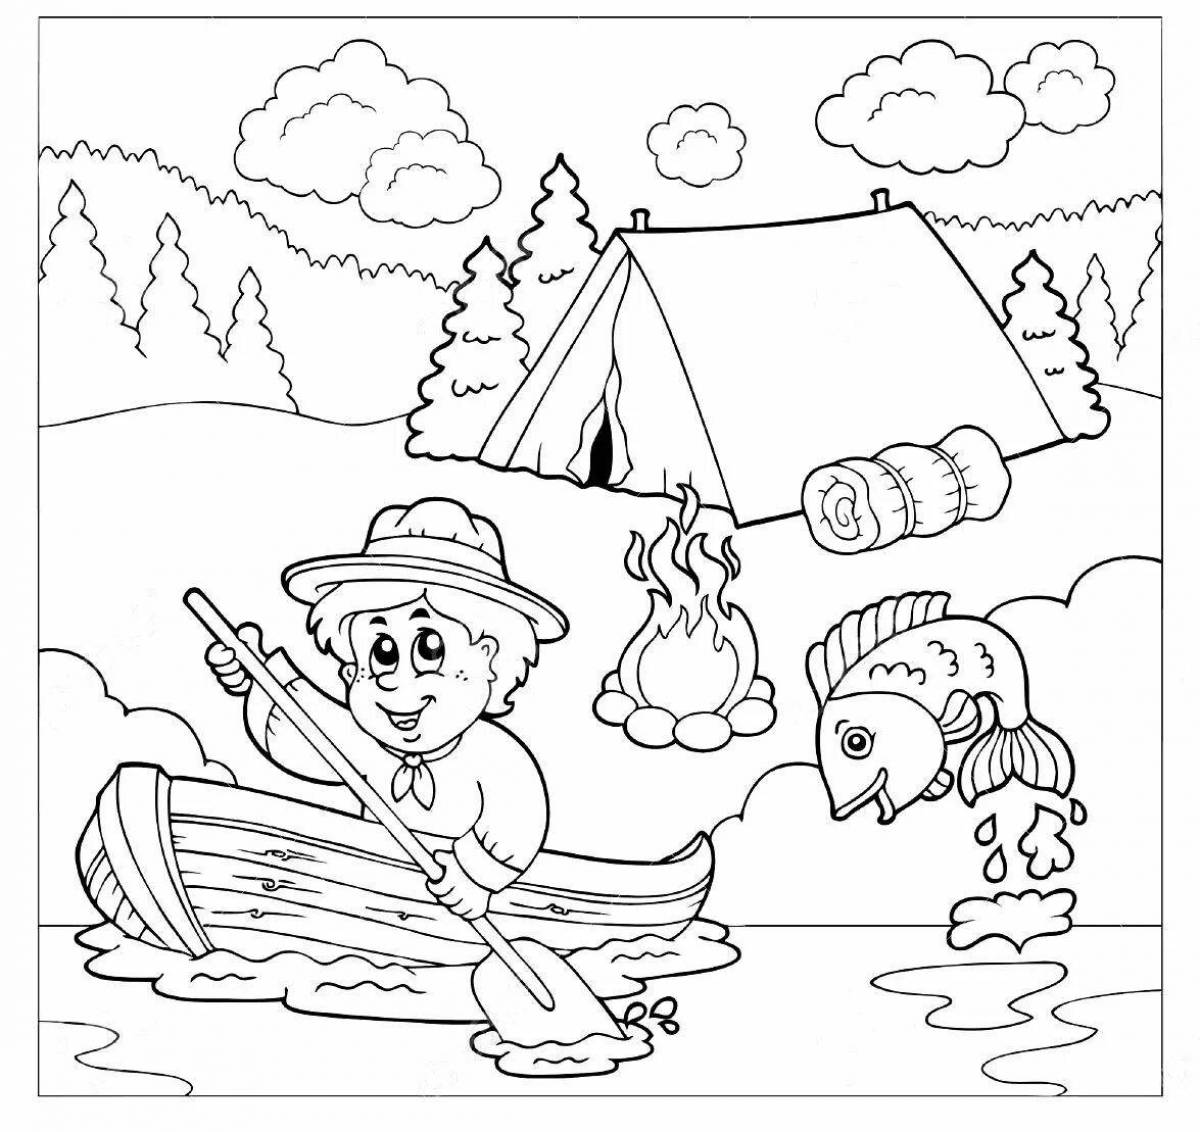 Intriguing coloring page